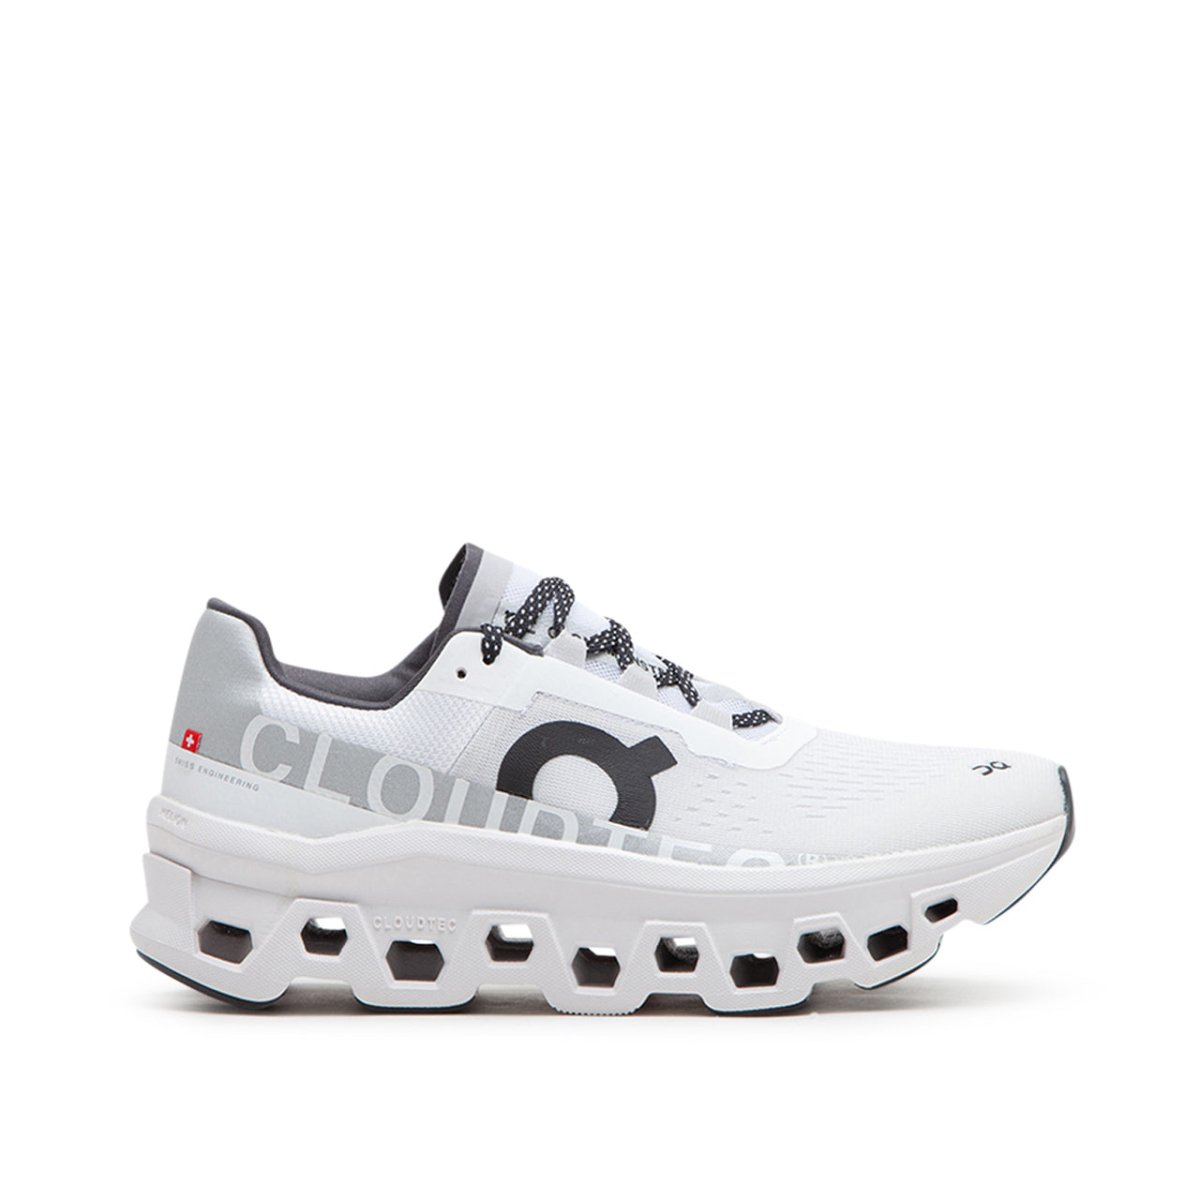 Image of On WMNS Cloudmonster (White / Black)